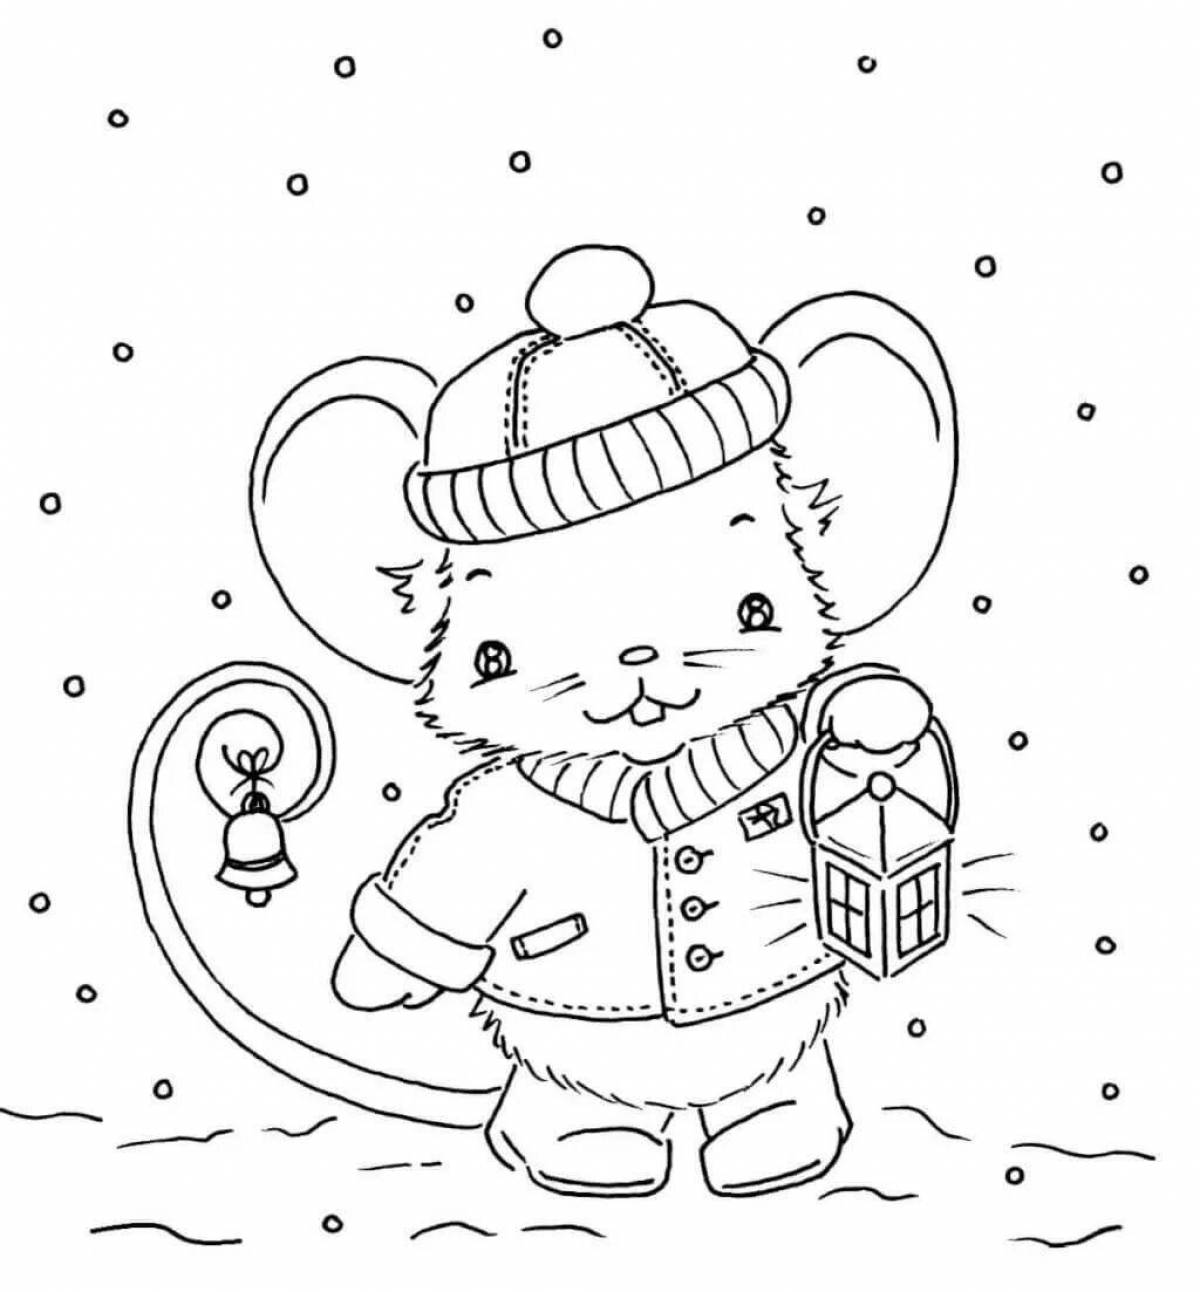 Snow-covered mouse in winter